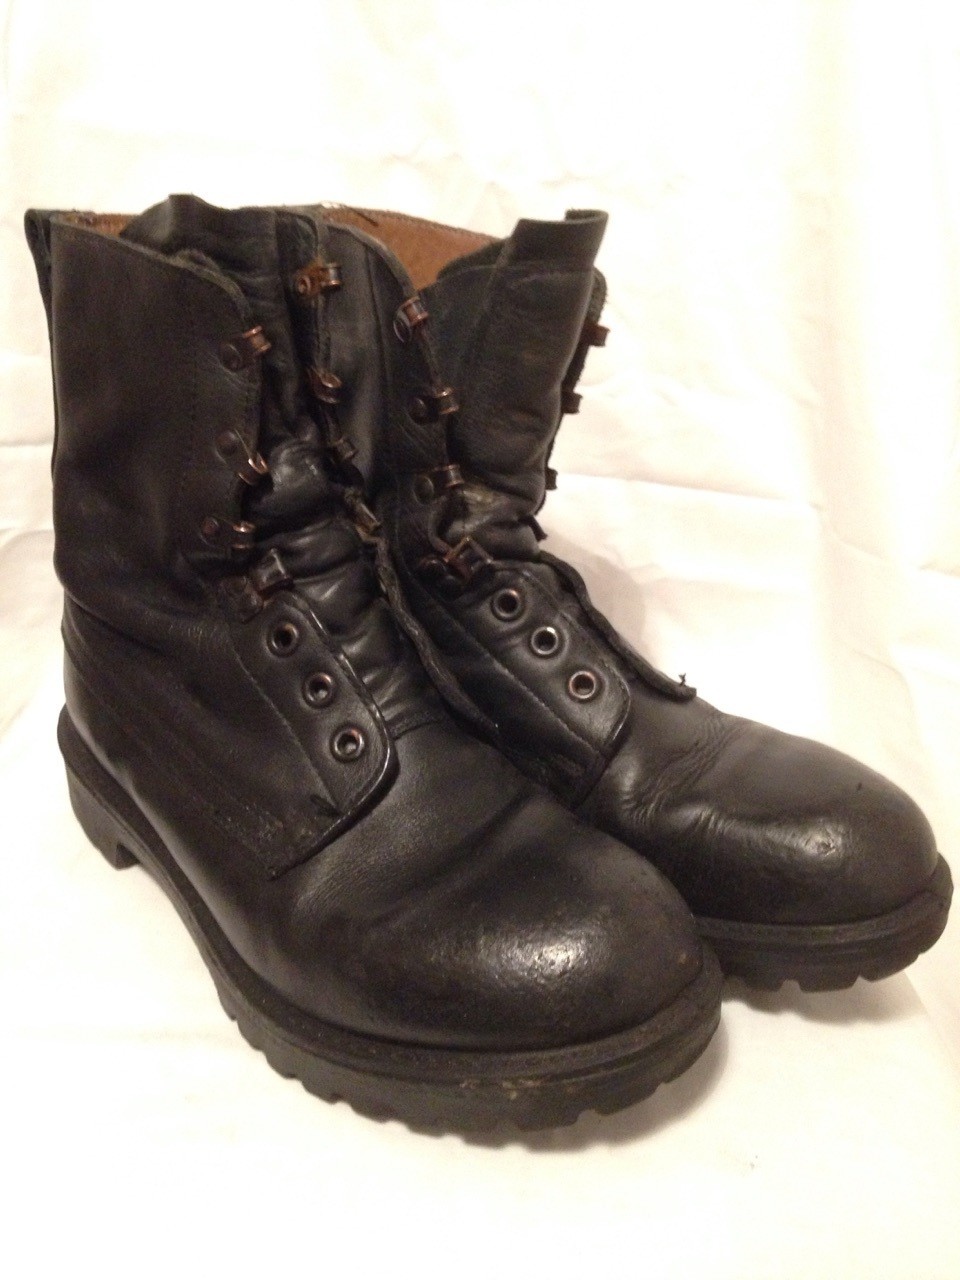 British Army Assault Boots Size 10M